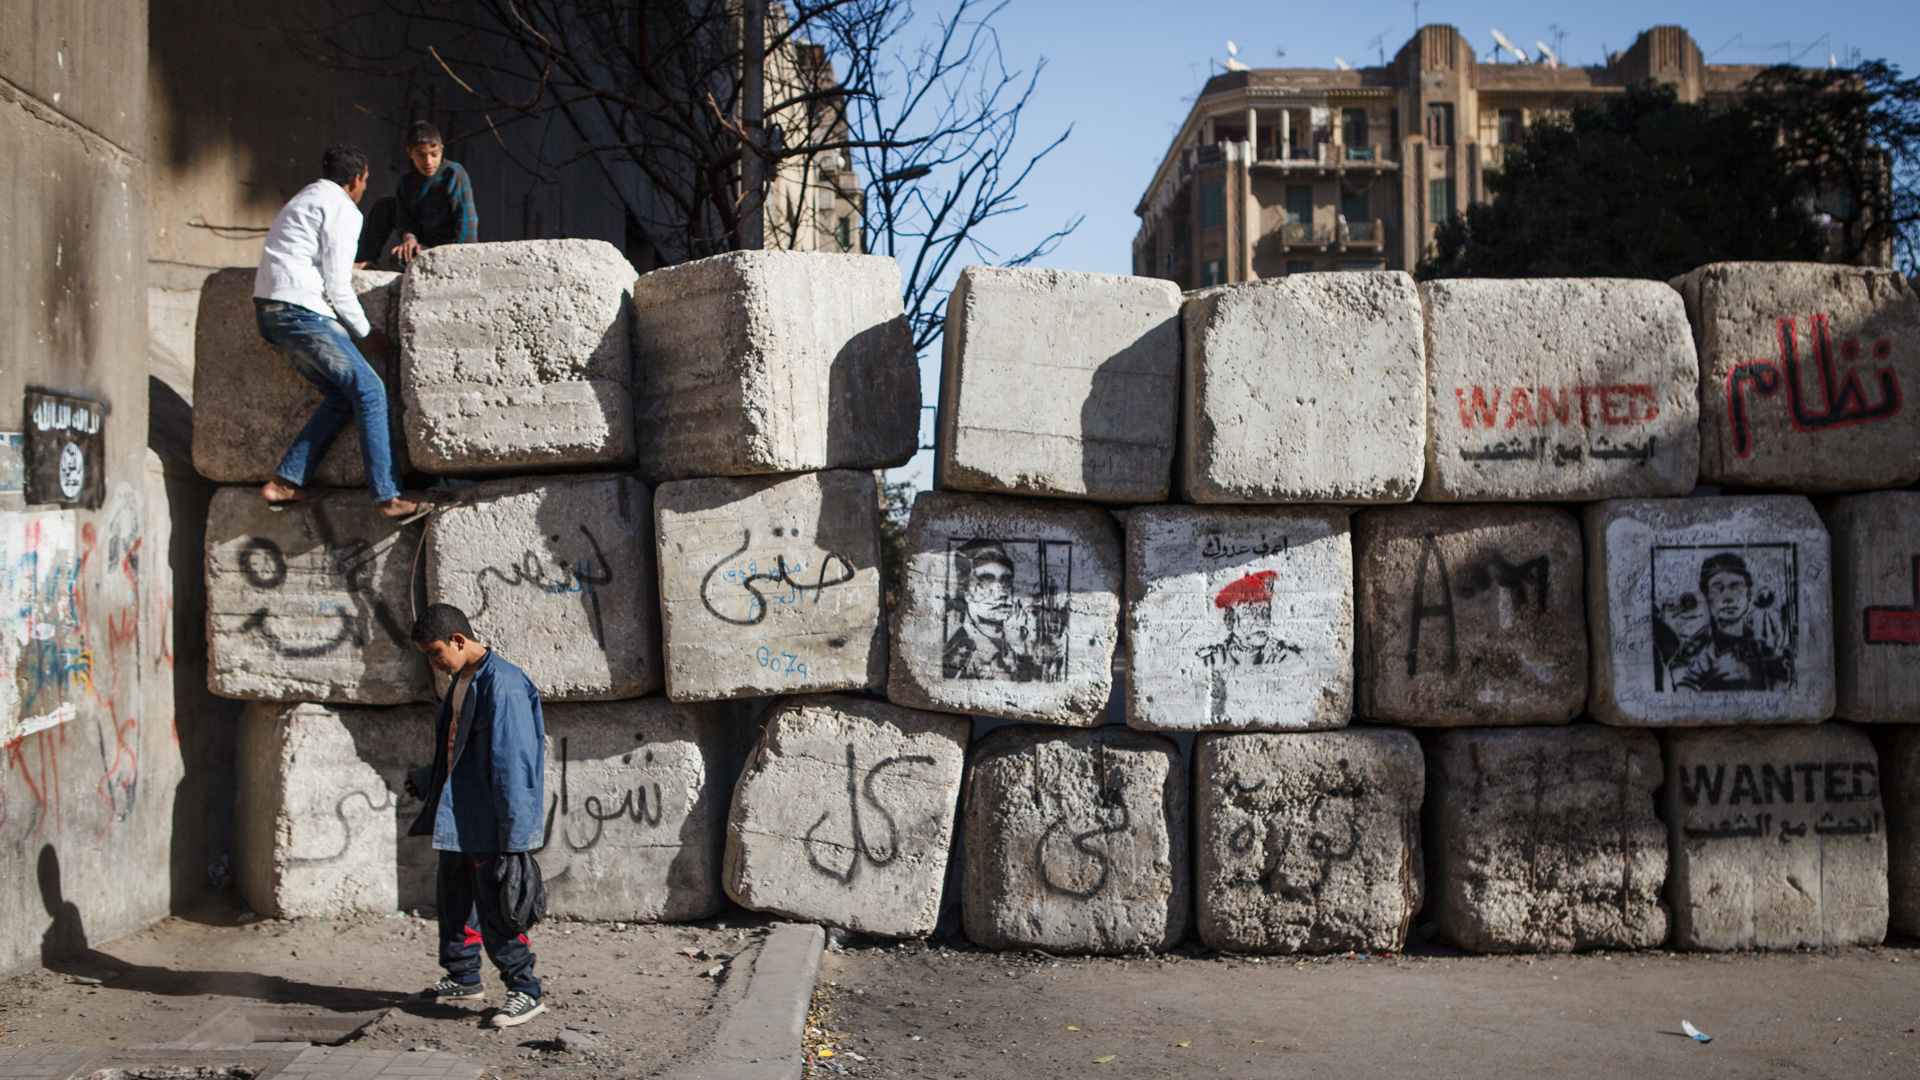 Youth clamber over a barrier in Cairo. 